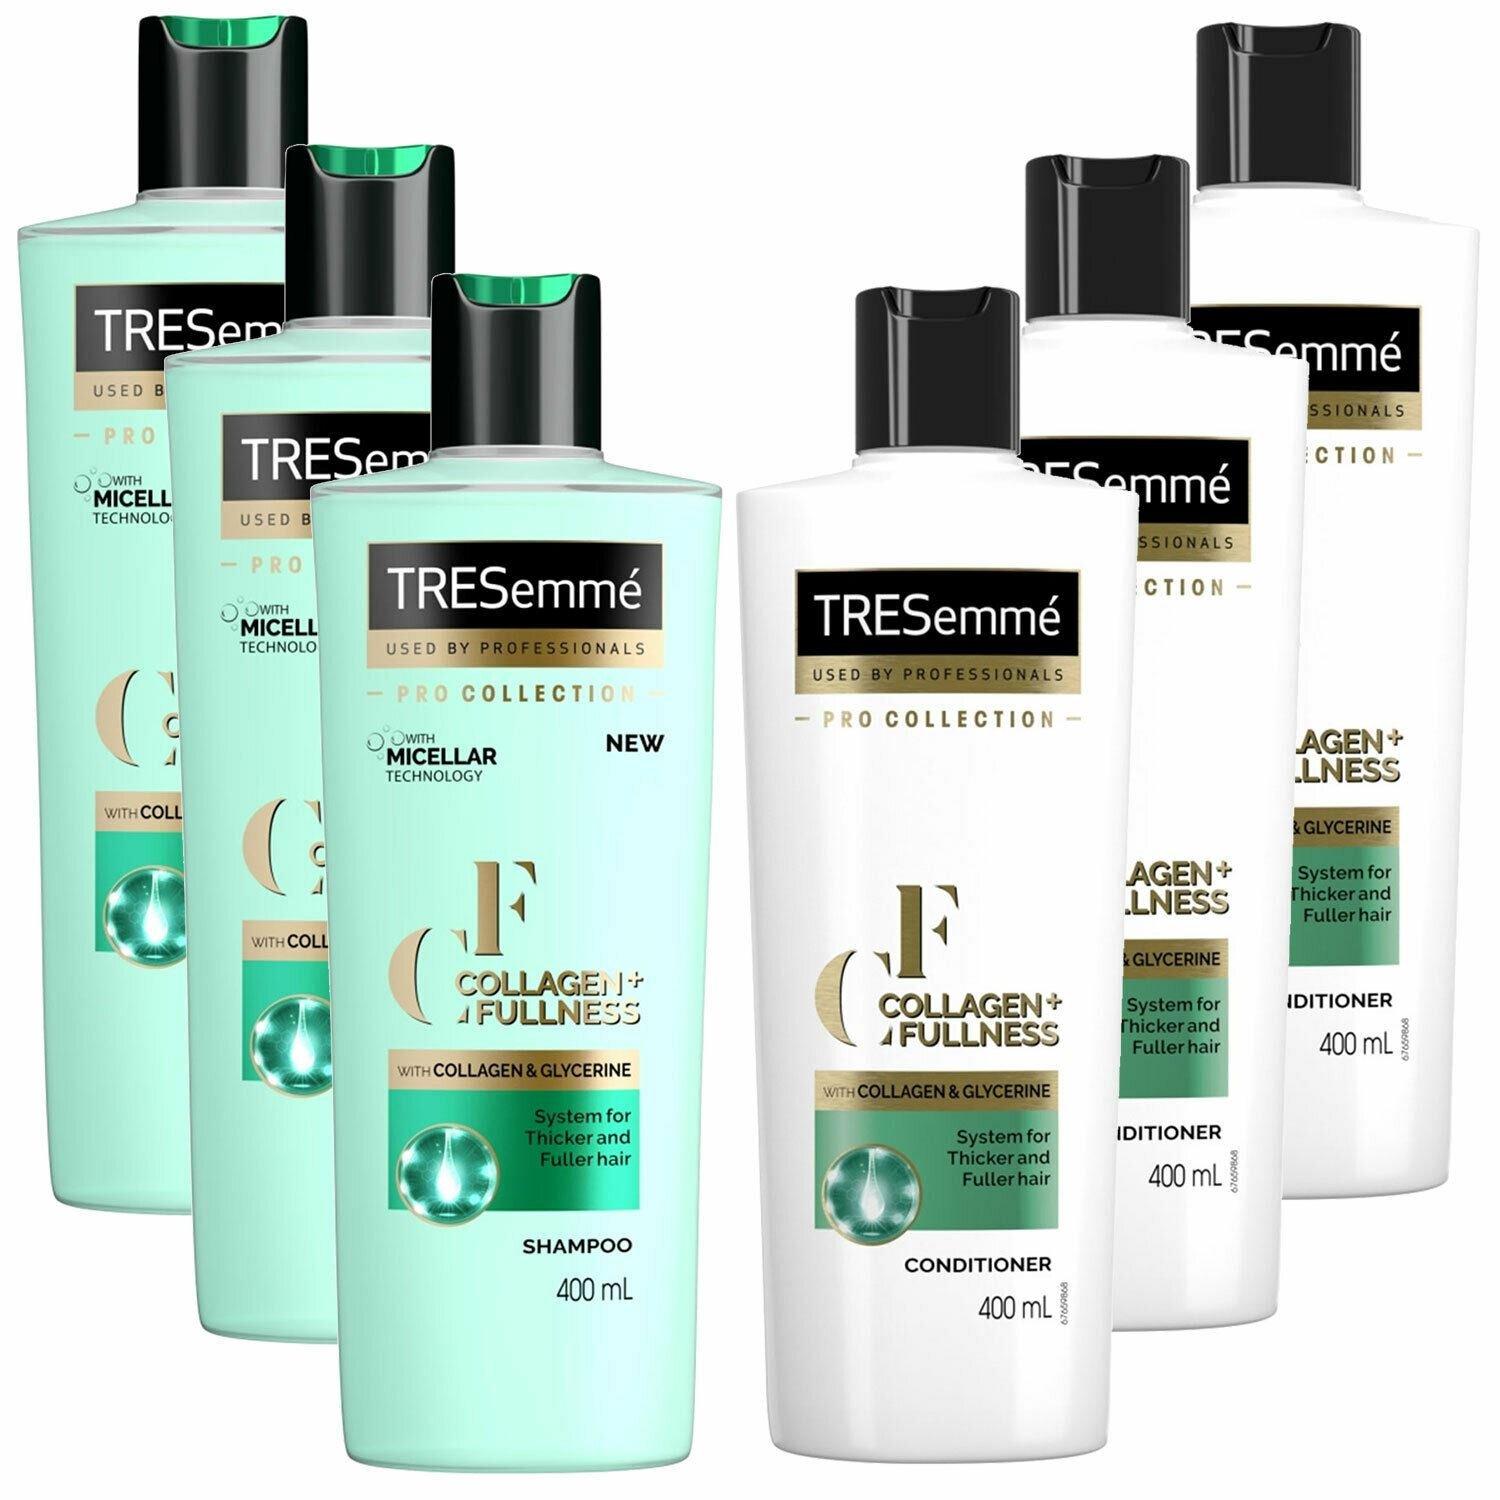 Tresemme Pro Collection Collagen And Fullness Shampoo And Conditioner Set 3